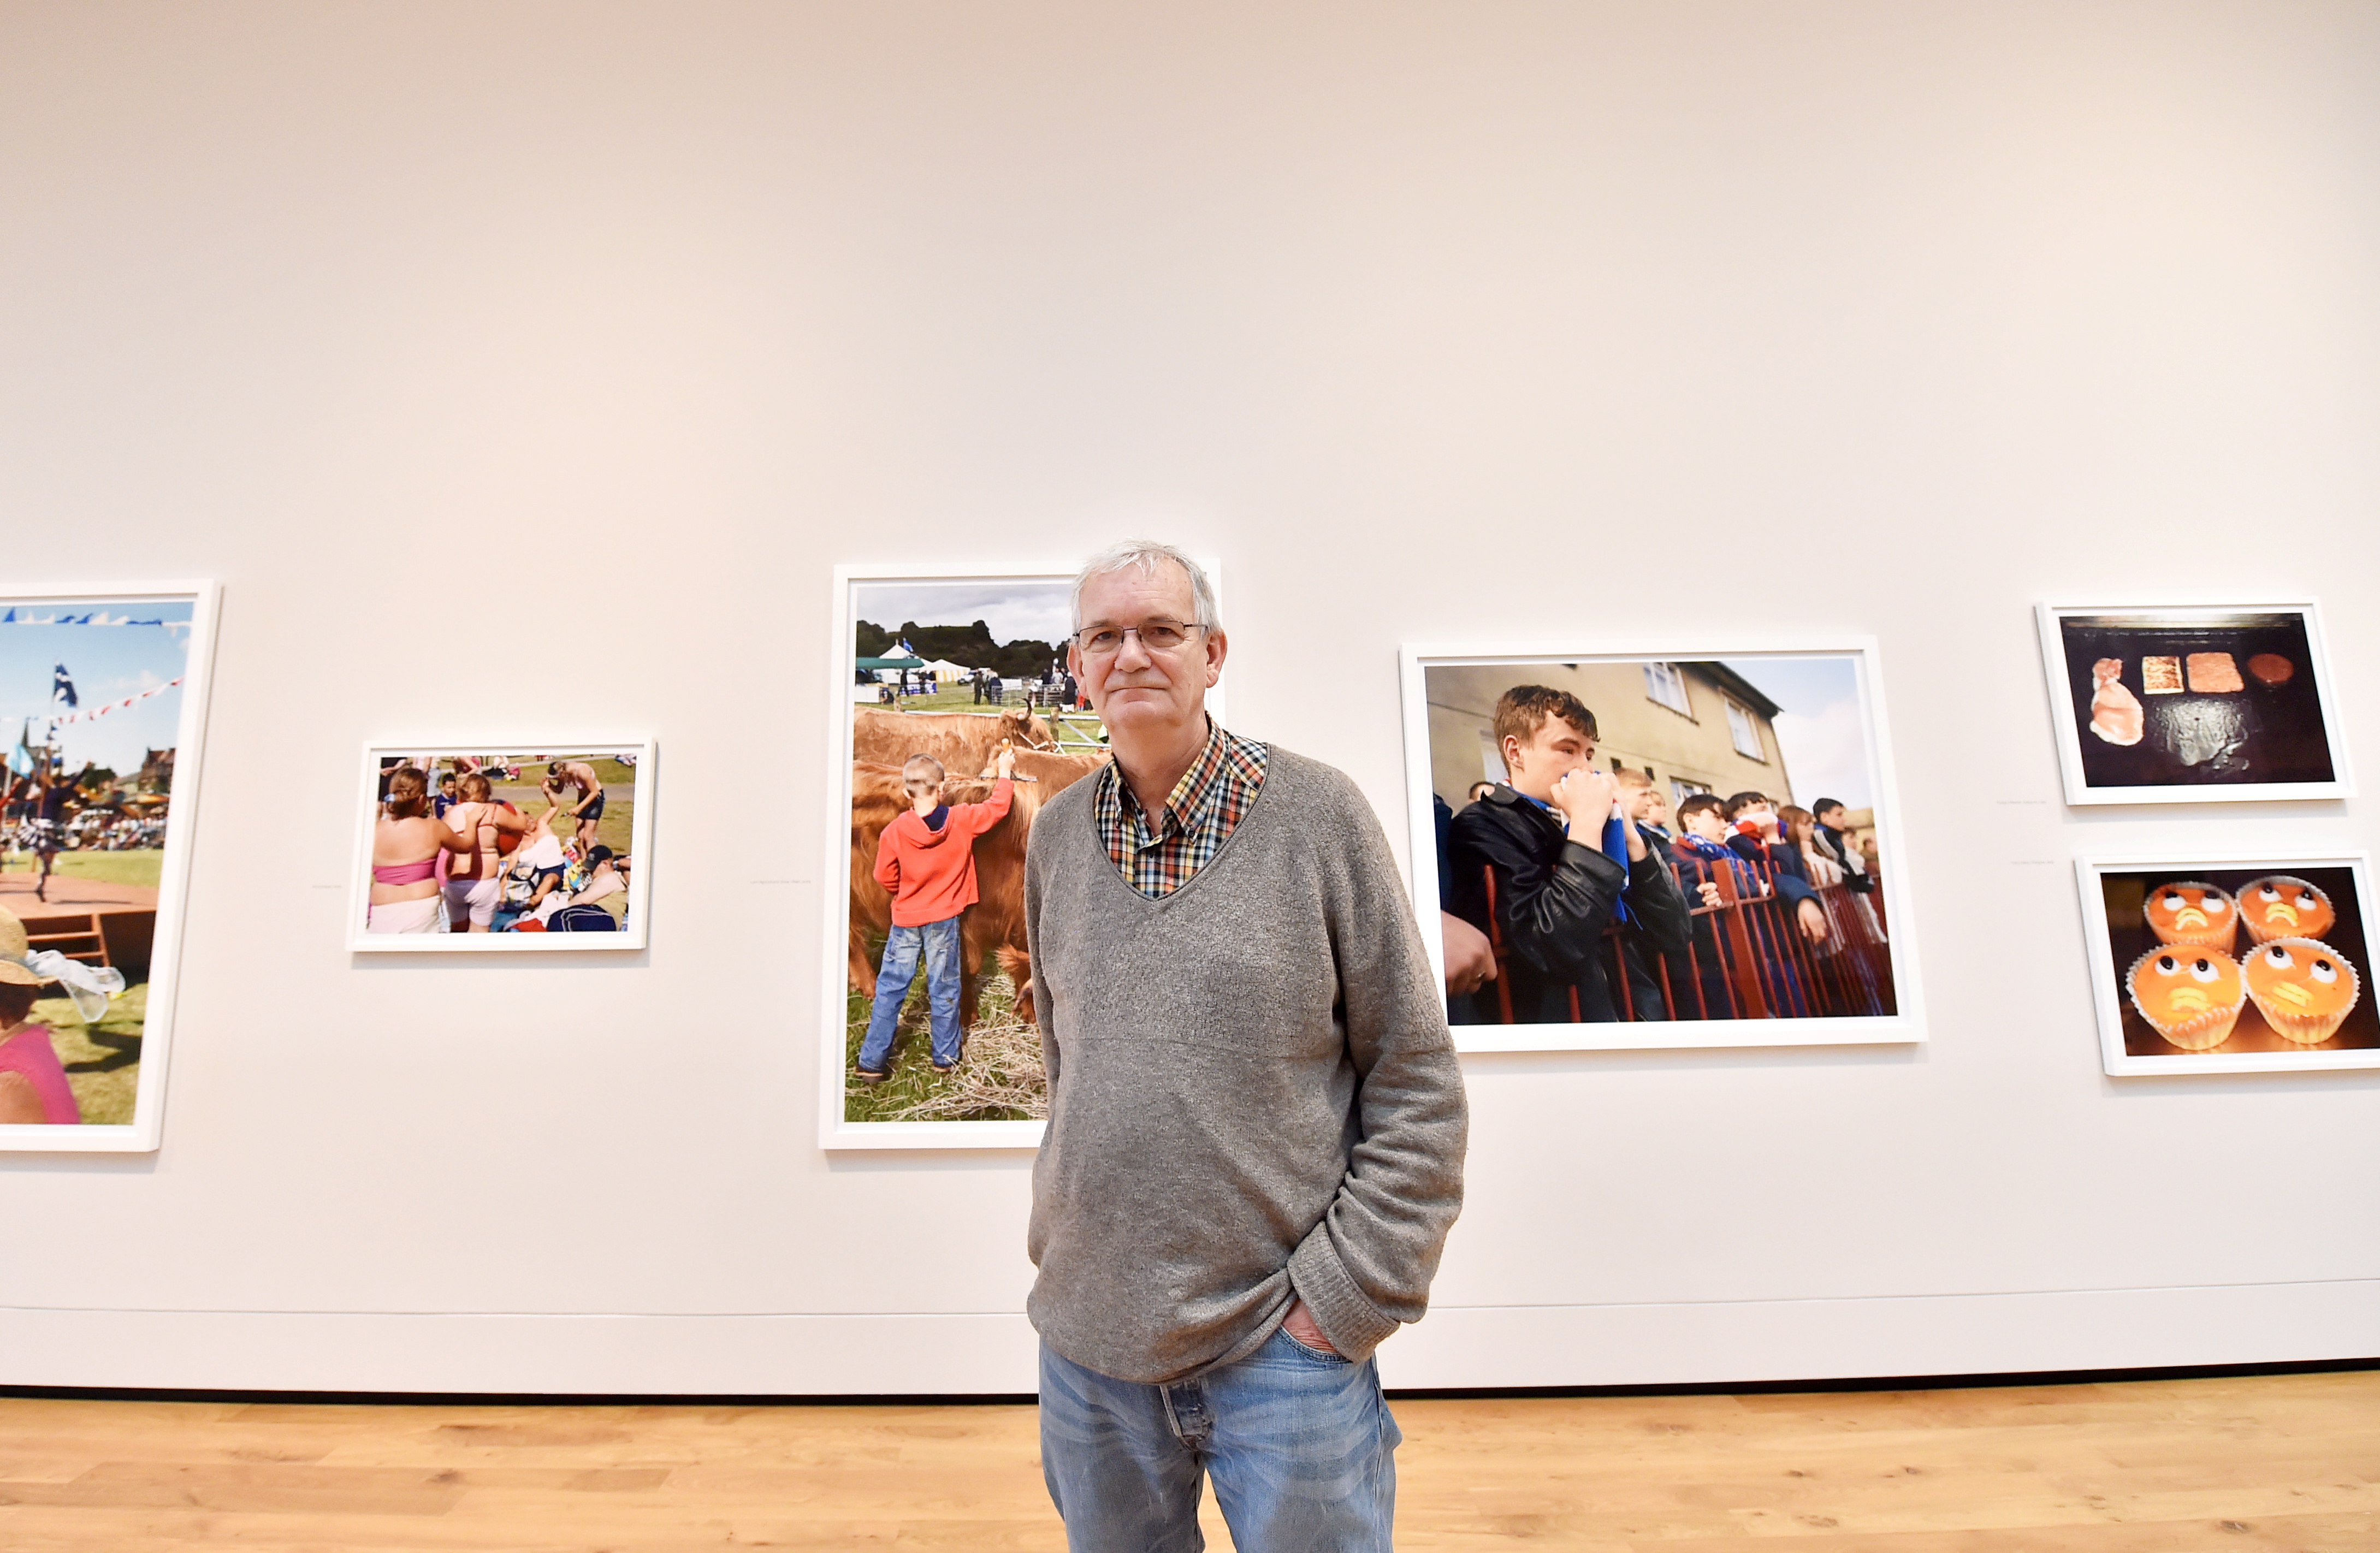 Martin Parr was commissioned by the Aberdeen Art Gallery for his exhibition Aberdeen at Leisure. 



Picture by Scott Baxter    31/10/2019